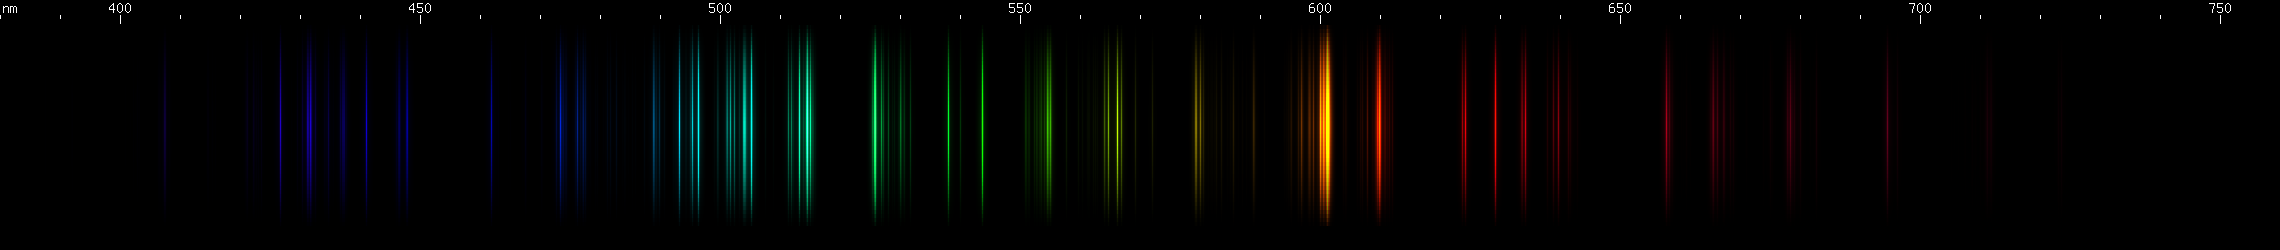 Spectral Lines of Carbon